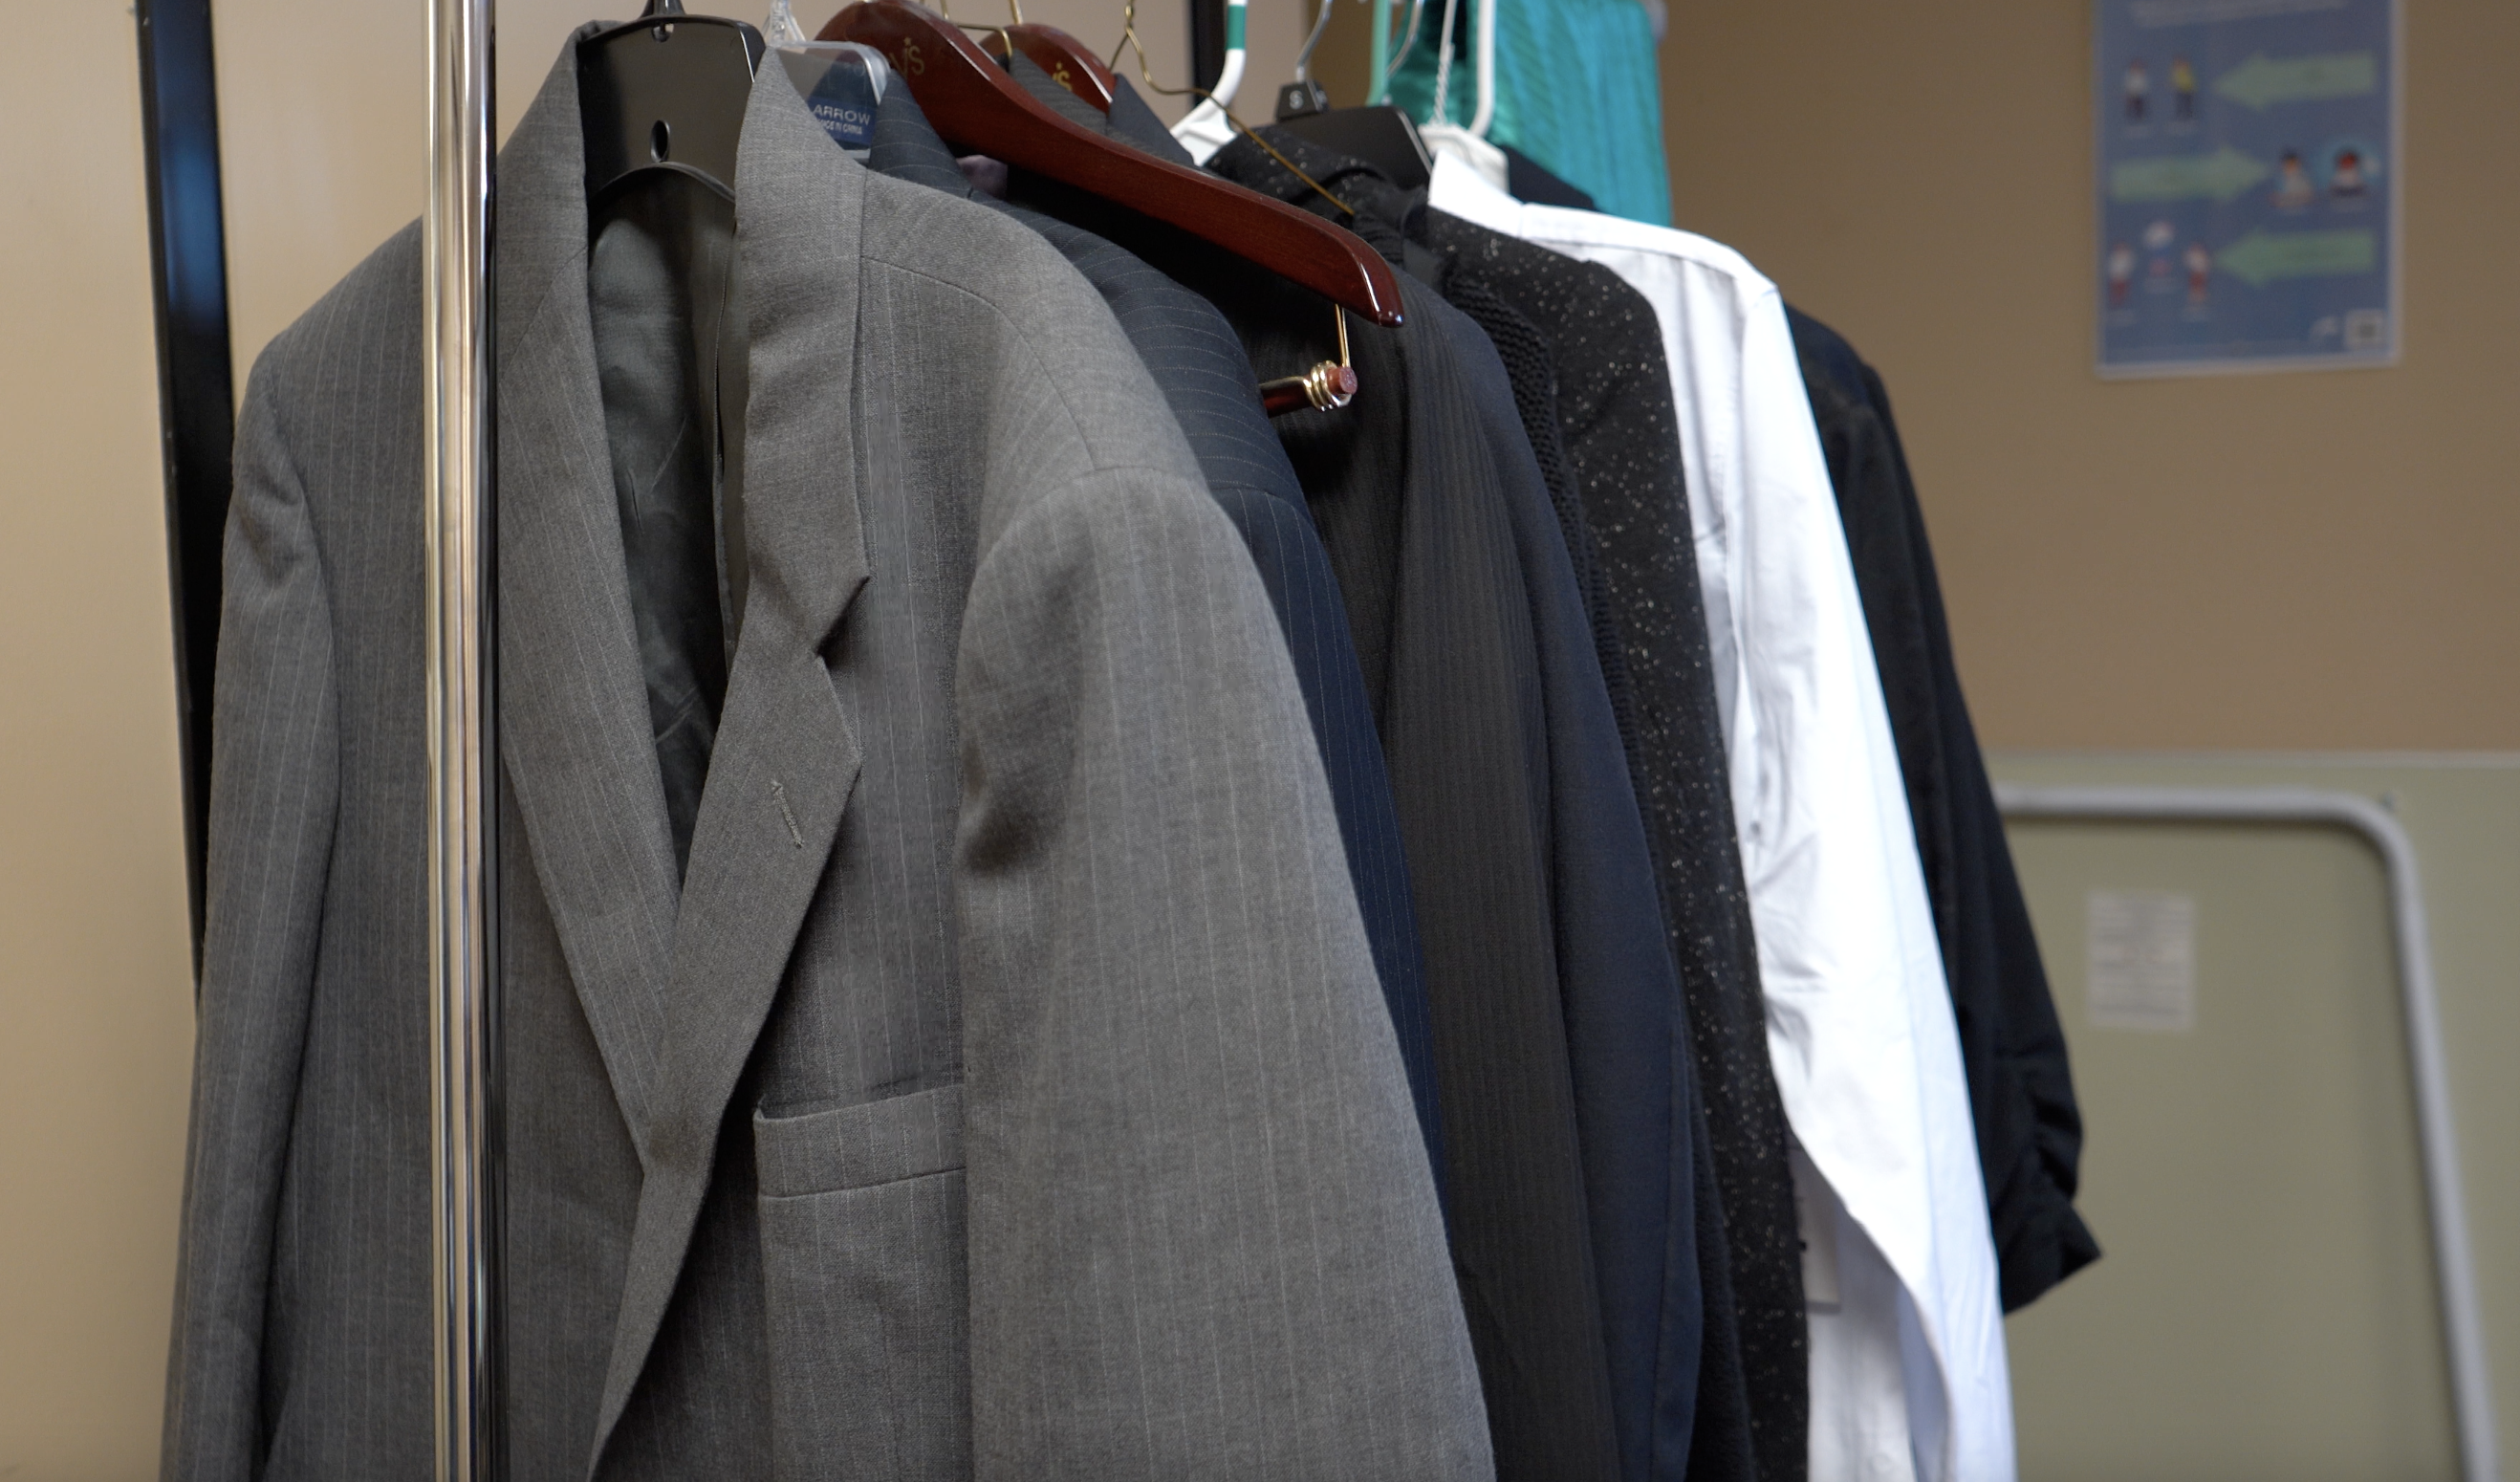 Image of donated professional clothes from UMOM's clothing closet.